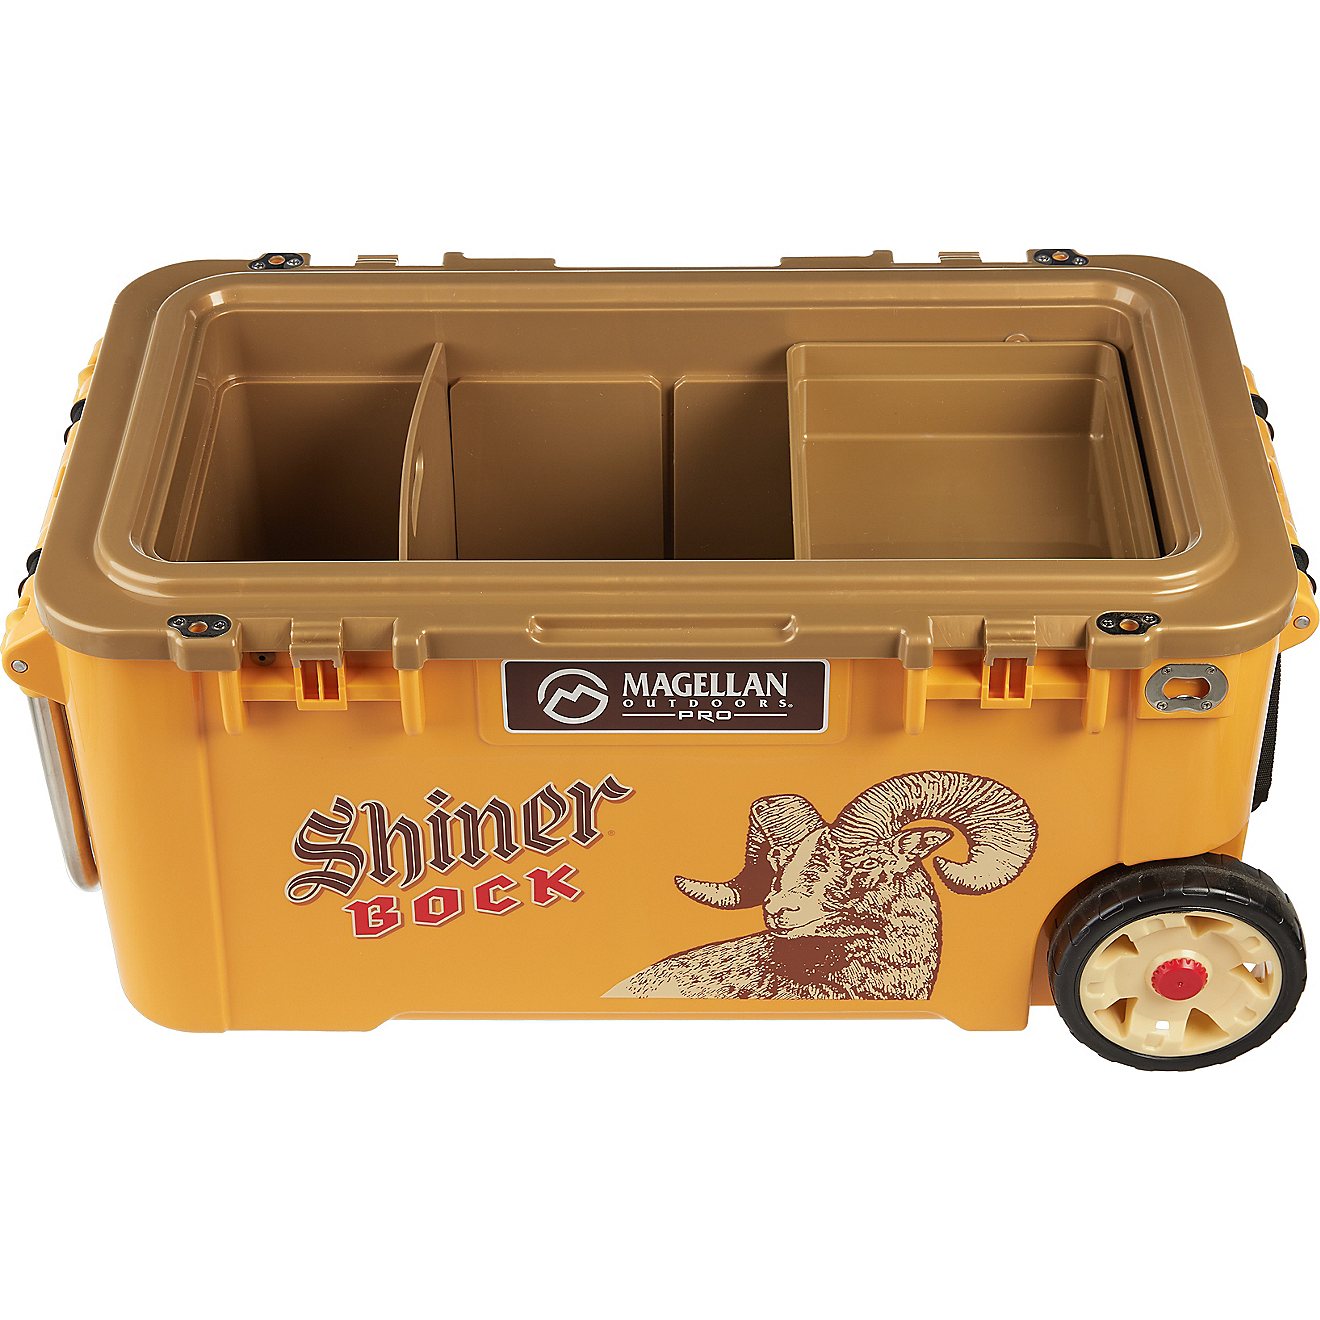 Magellan Outdoors Pro Explore Shiner Icebox 45 qt Hard Cooler with Wheels                                                        - view number 5